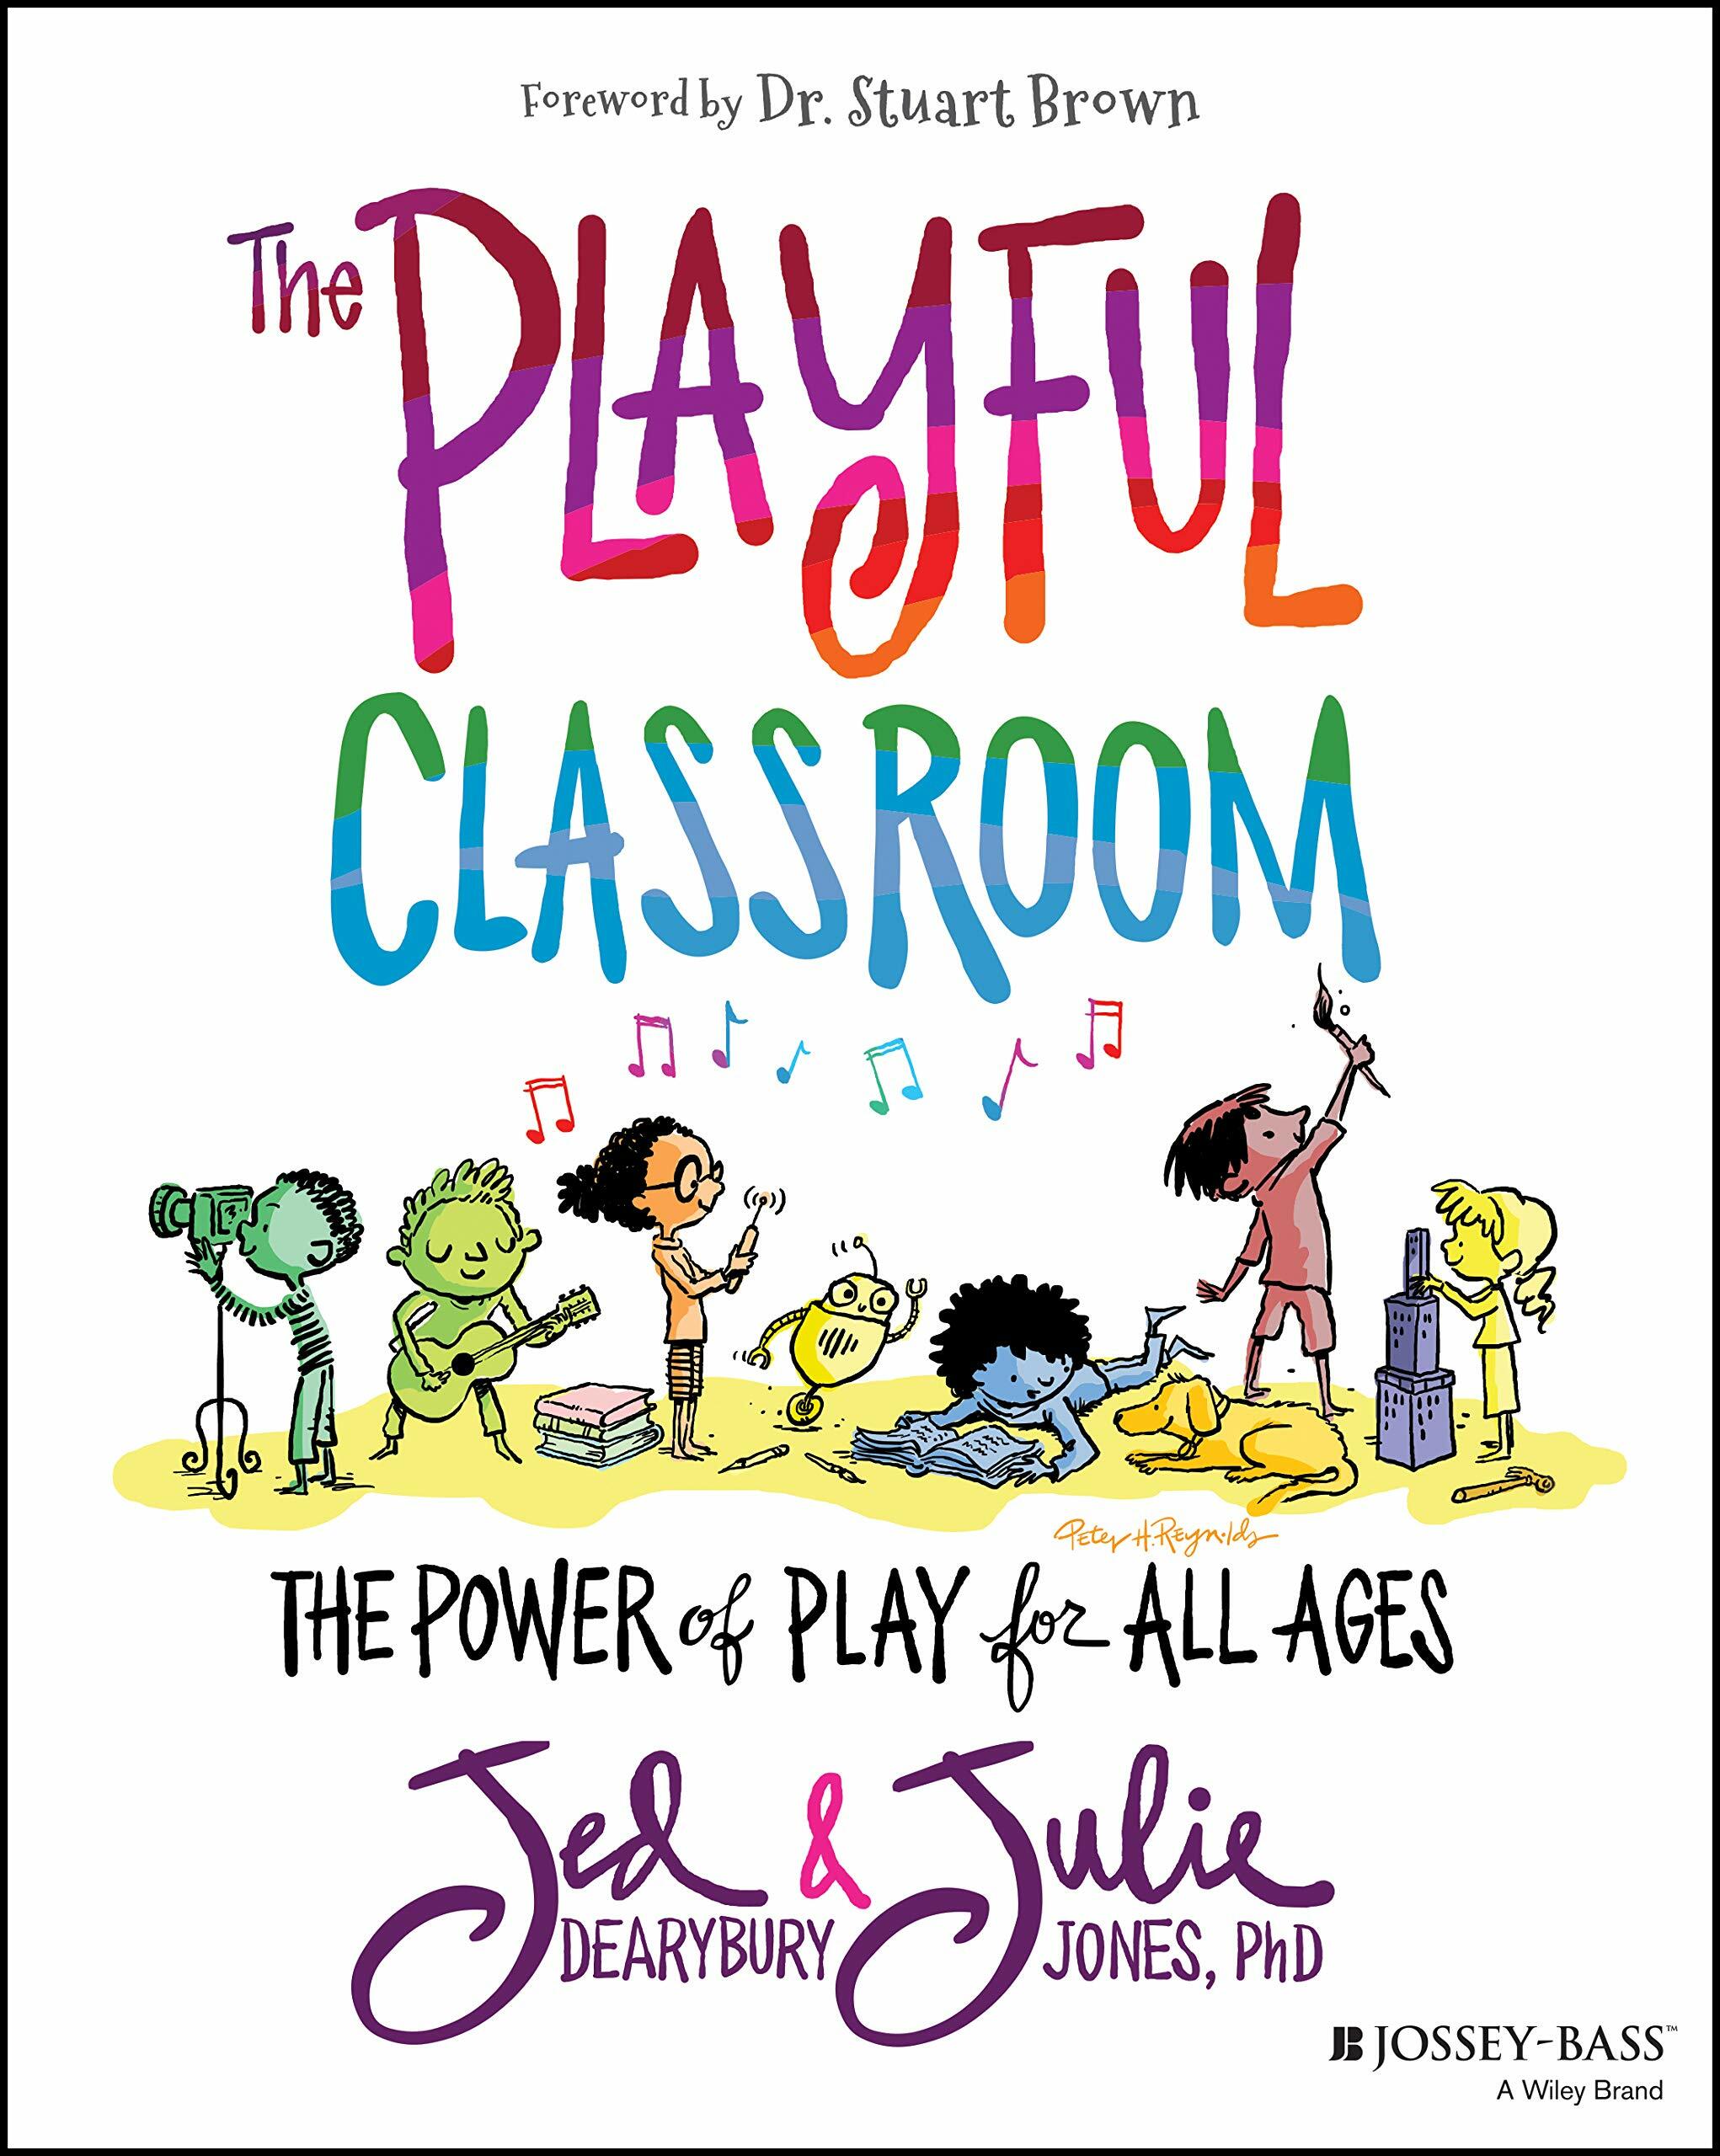 The Playful Classroom: The Power of Play for All Ages (Paperback)